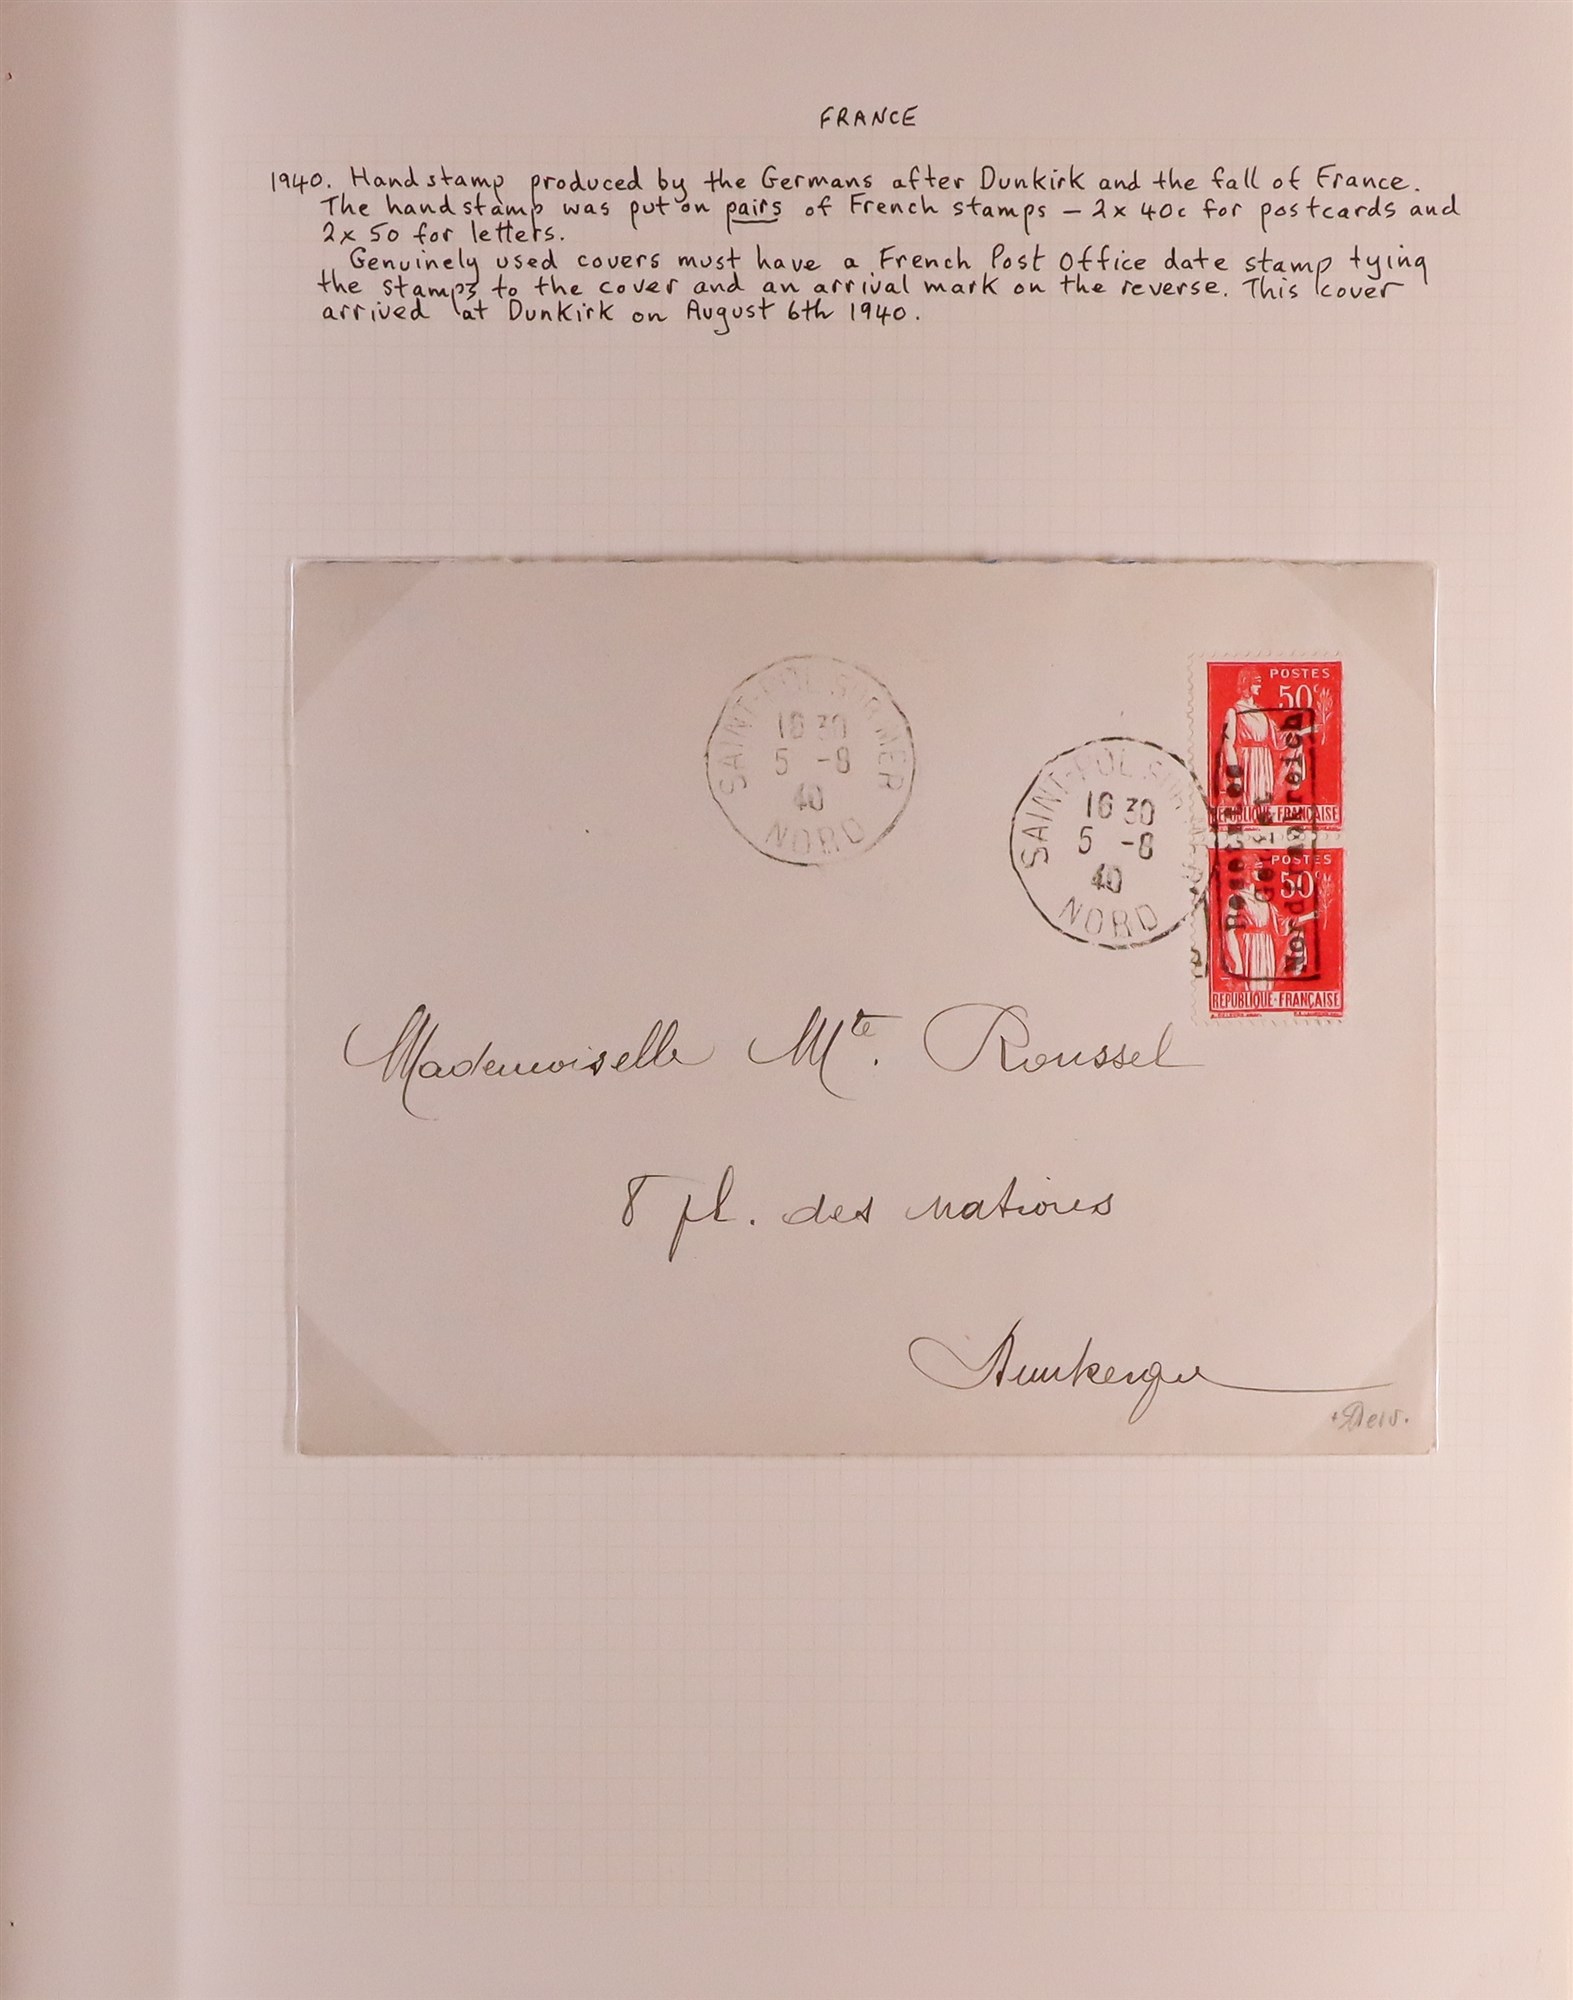 FRANCE 1940 DUNKERQUE. Two covers and mint pair with the "Besetztes / Gebiet / Nordfrankreich"